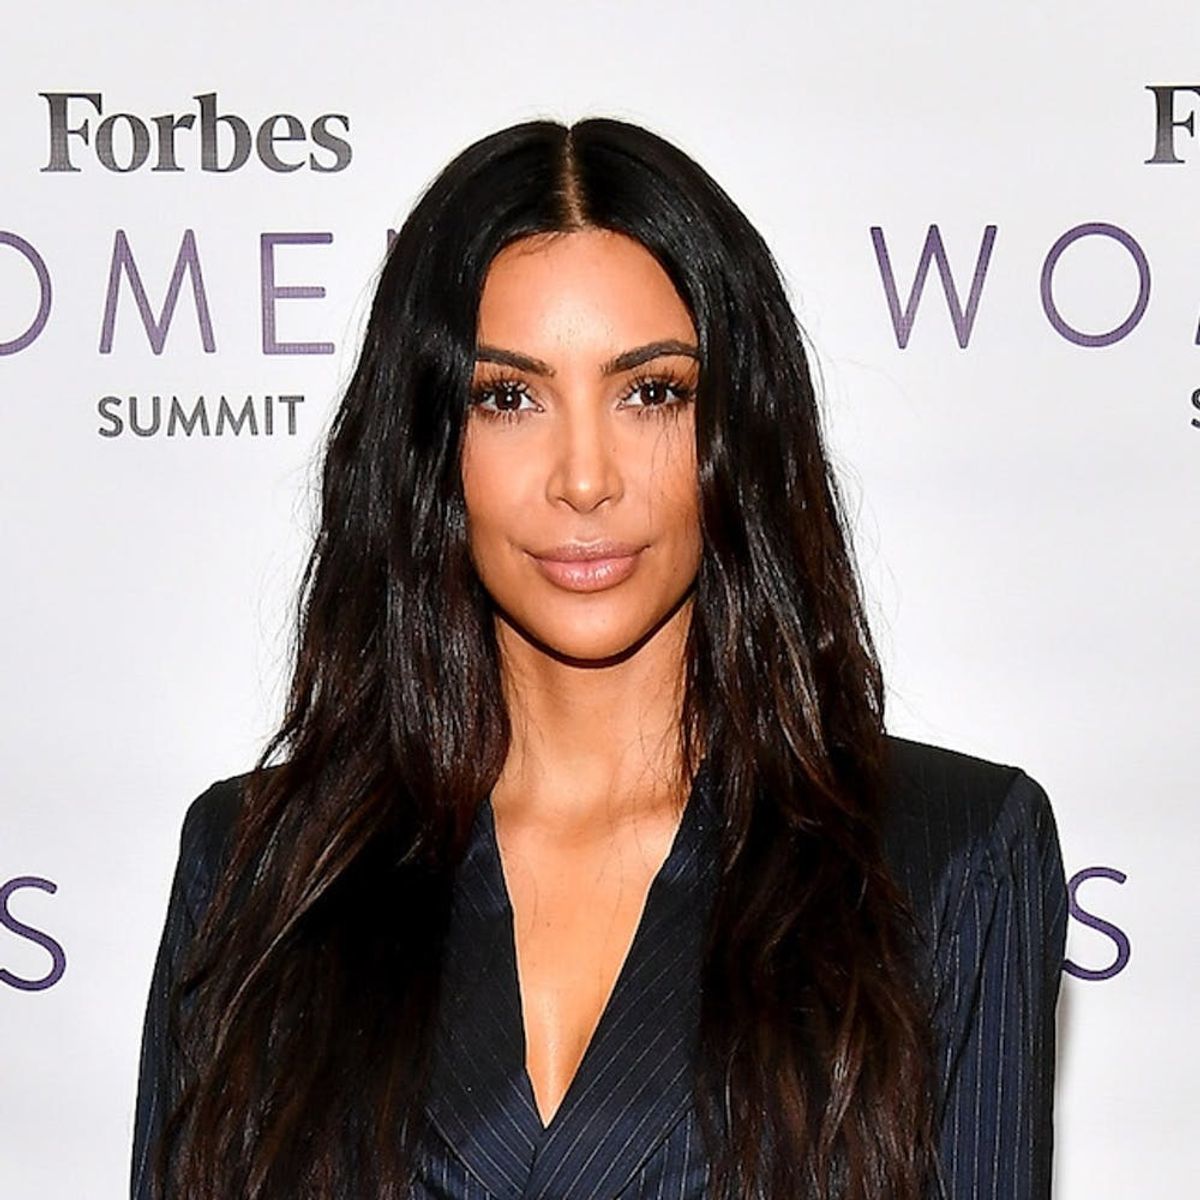 Kim Kardashian West Responds to the Controversy Over Her KKW Beauty Line